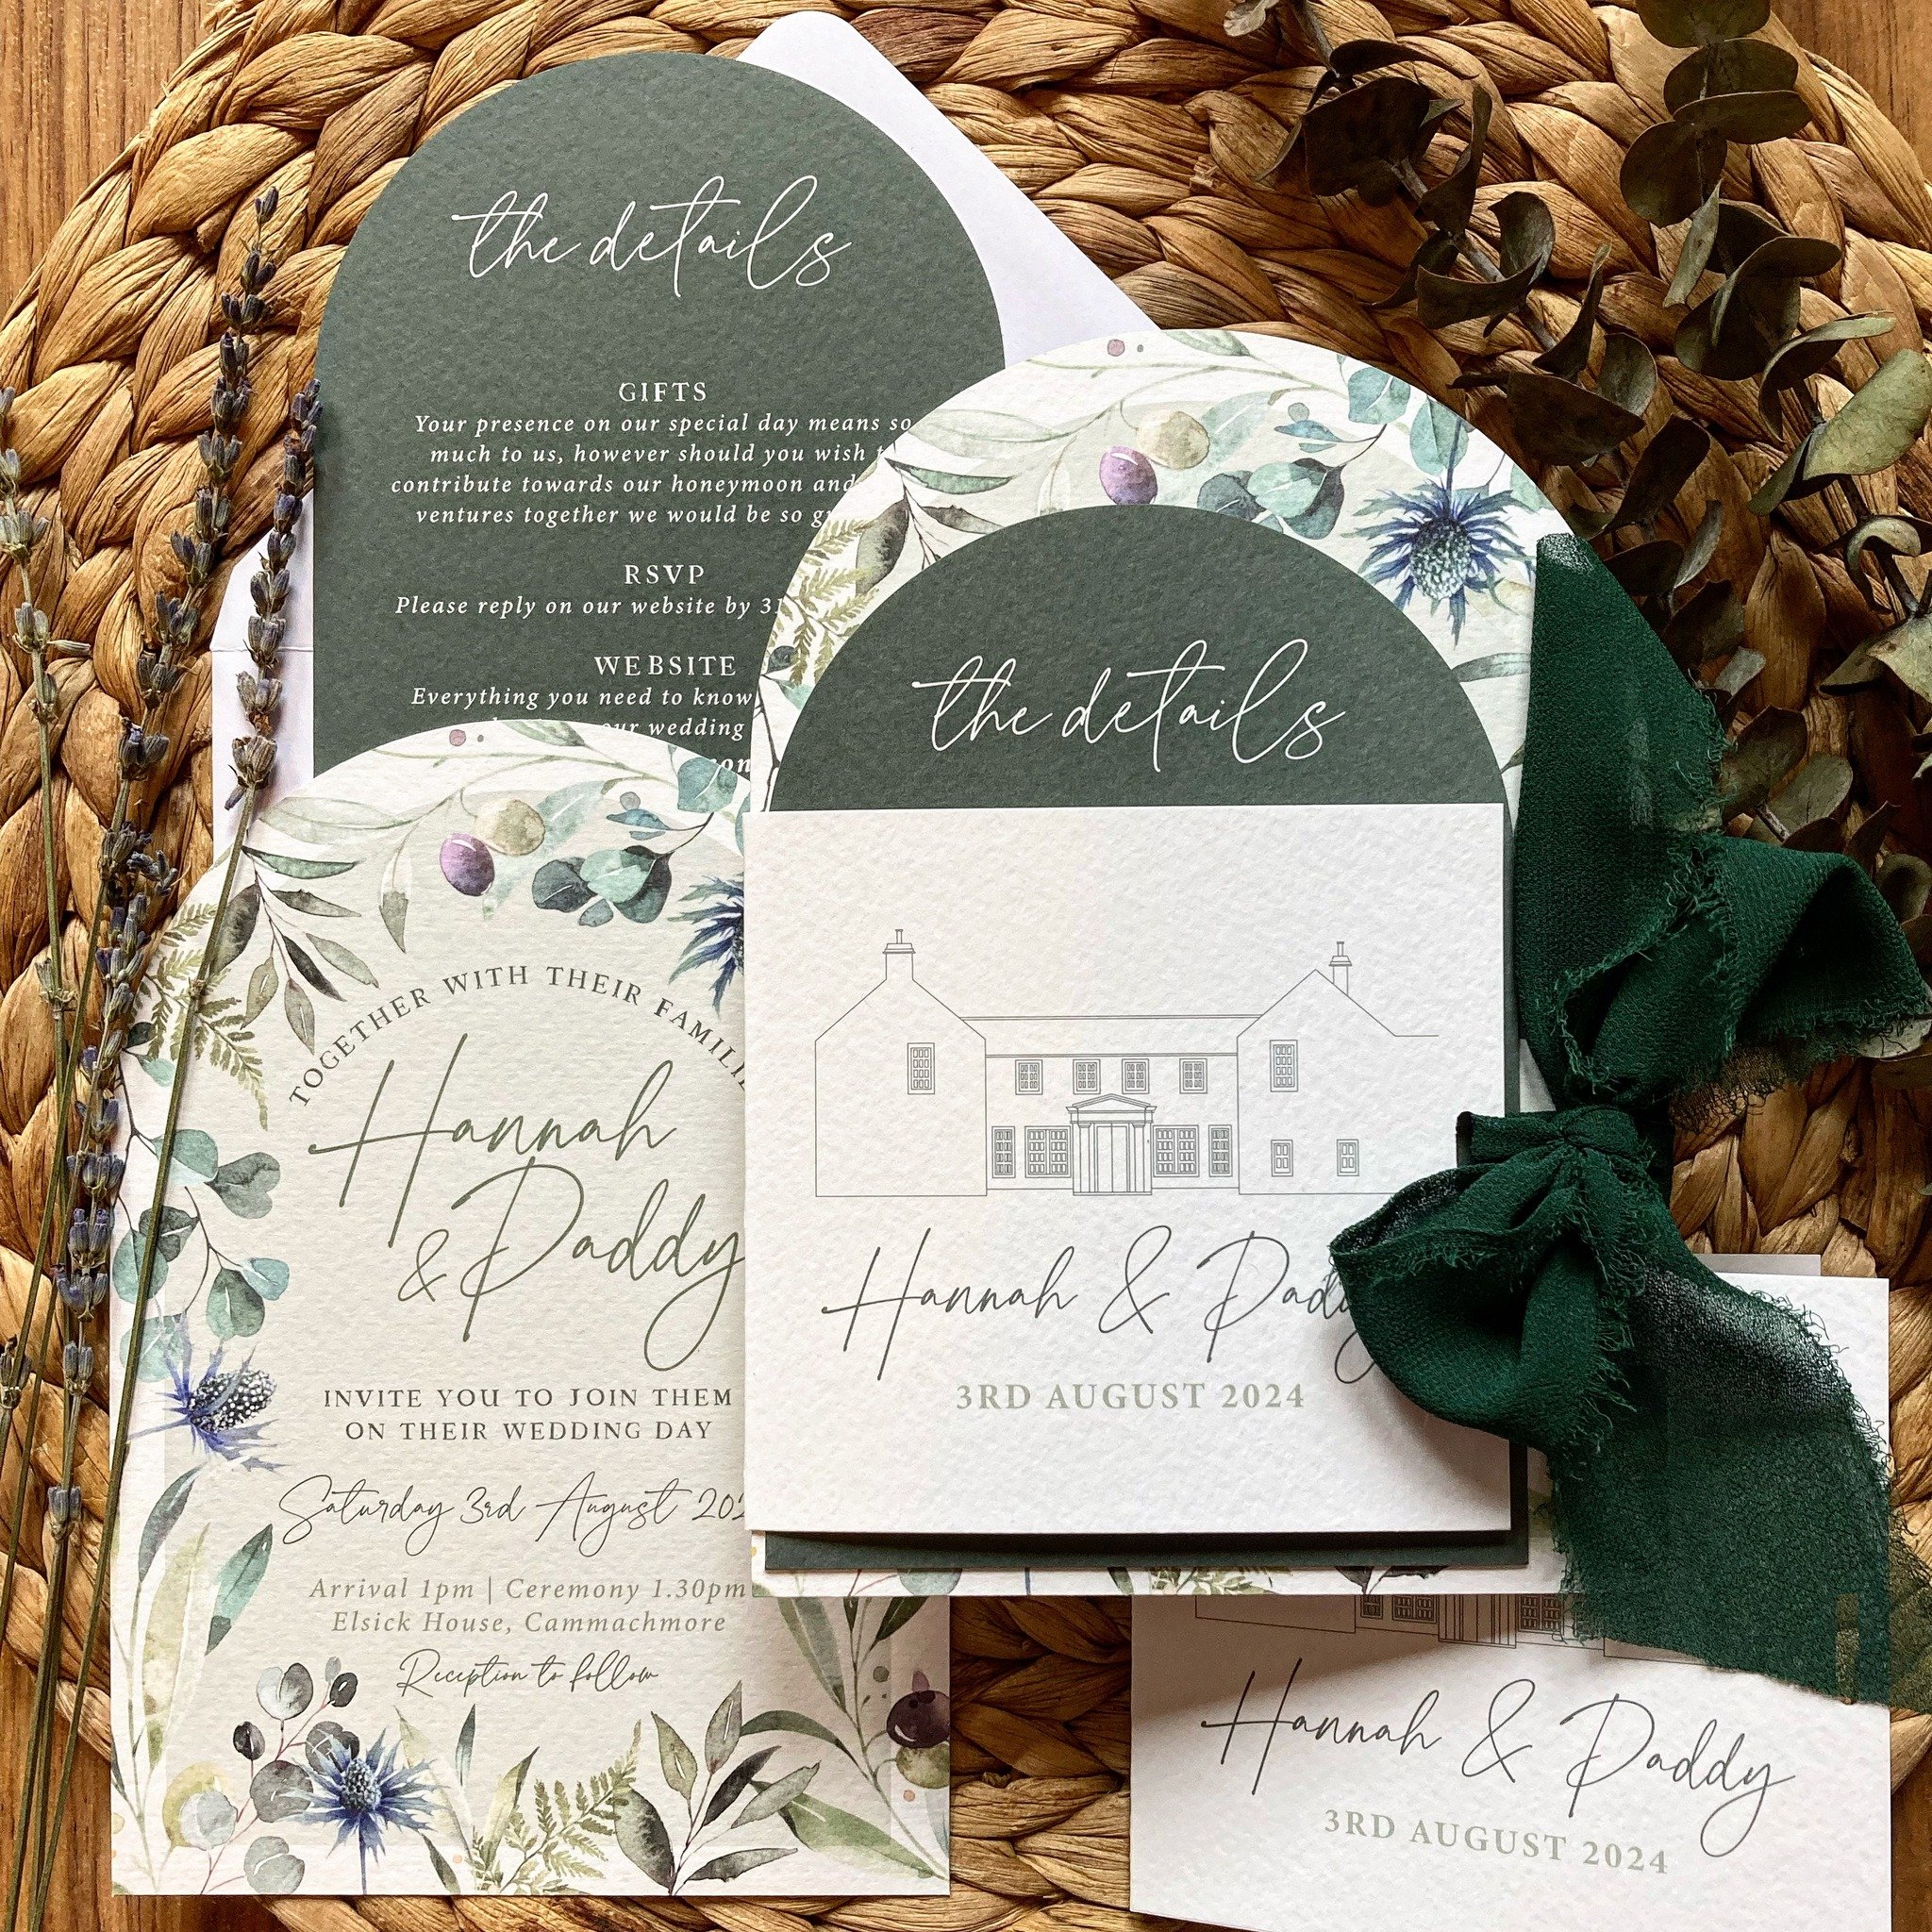 Beautiful arched invitations with green foliage, olives and thistles, bundled up with a venue drawing of @elsickhouse and a lovely forest green chiffon ribbon 👌🏻
⠀⠀⠀⠀
#weddingstationery #weddinginvitations #invitations #prettypaper #lovepaperco #pu